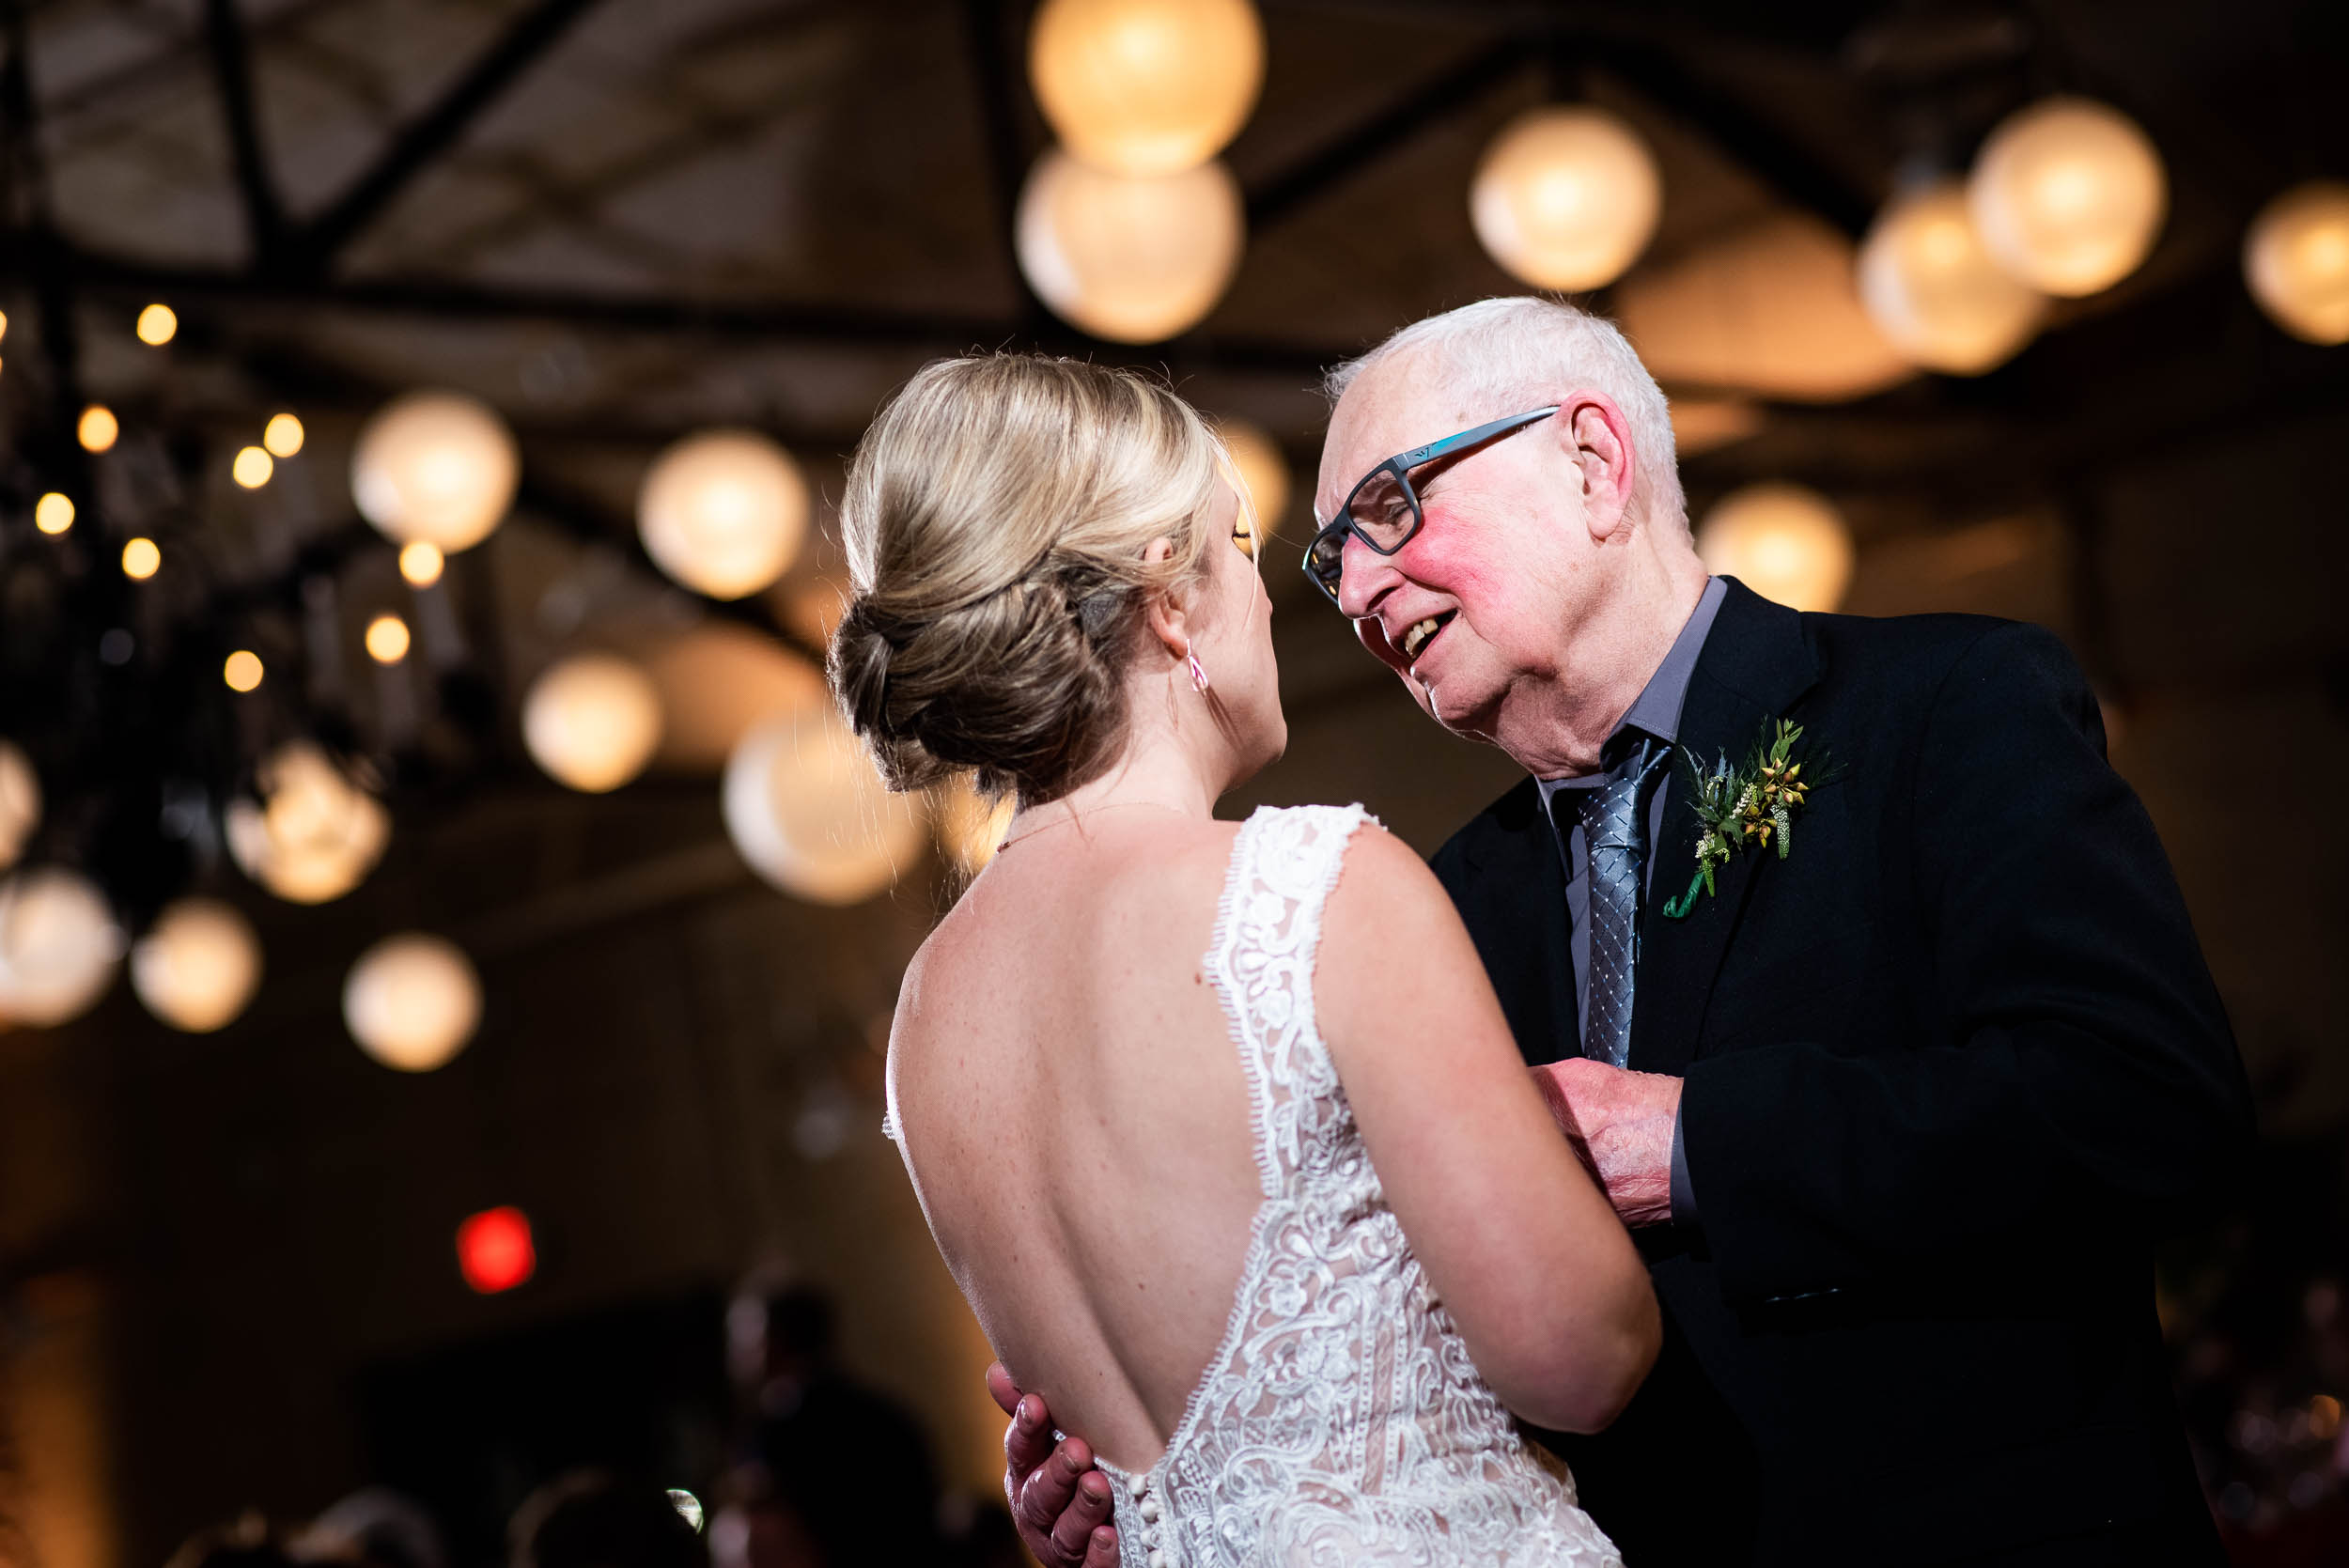 Father/daughter dance: Modern industrial Chicago wedding inside Prairie Street Brewhouse captured by J. Brown Photography. Find more wedding ideas at jbrownphotography.com!